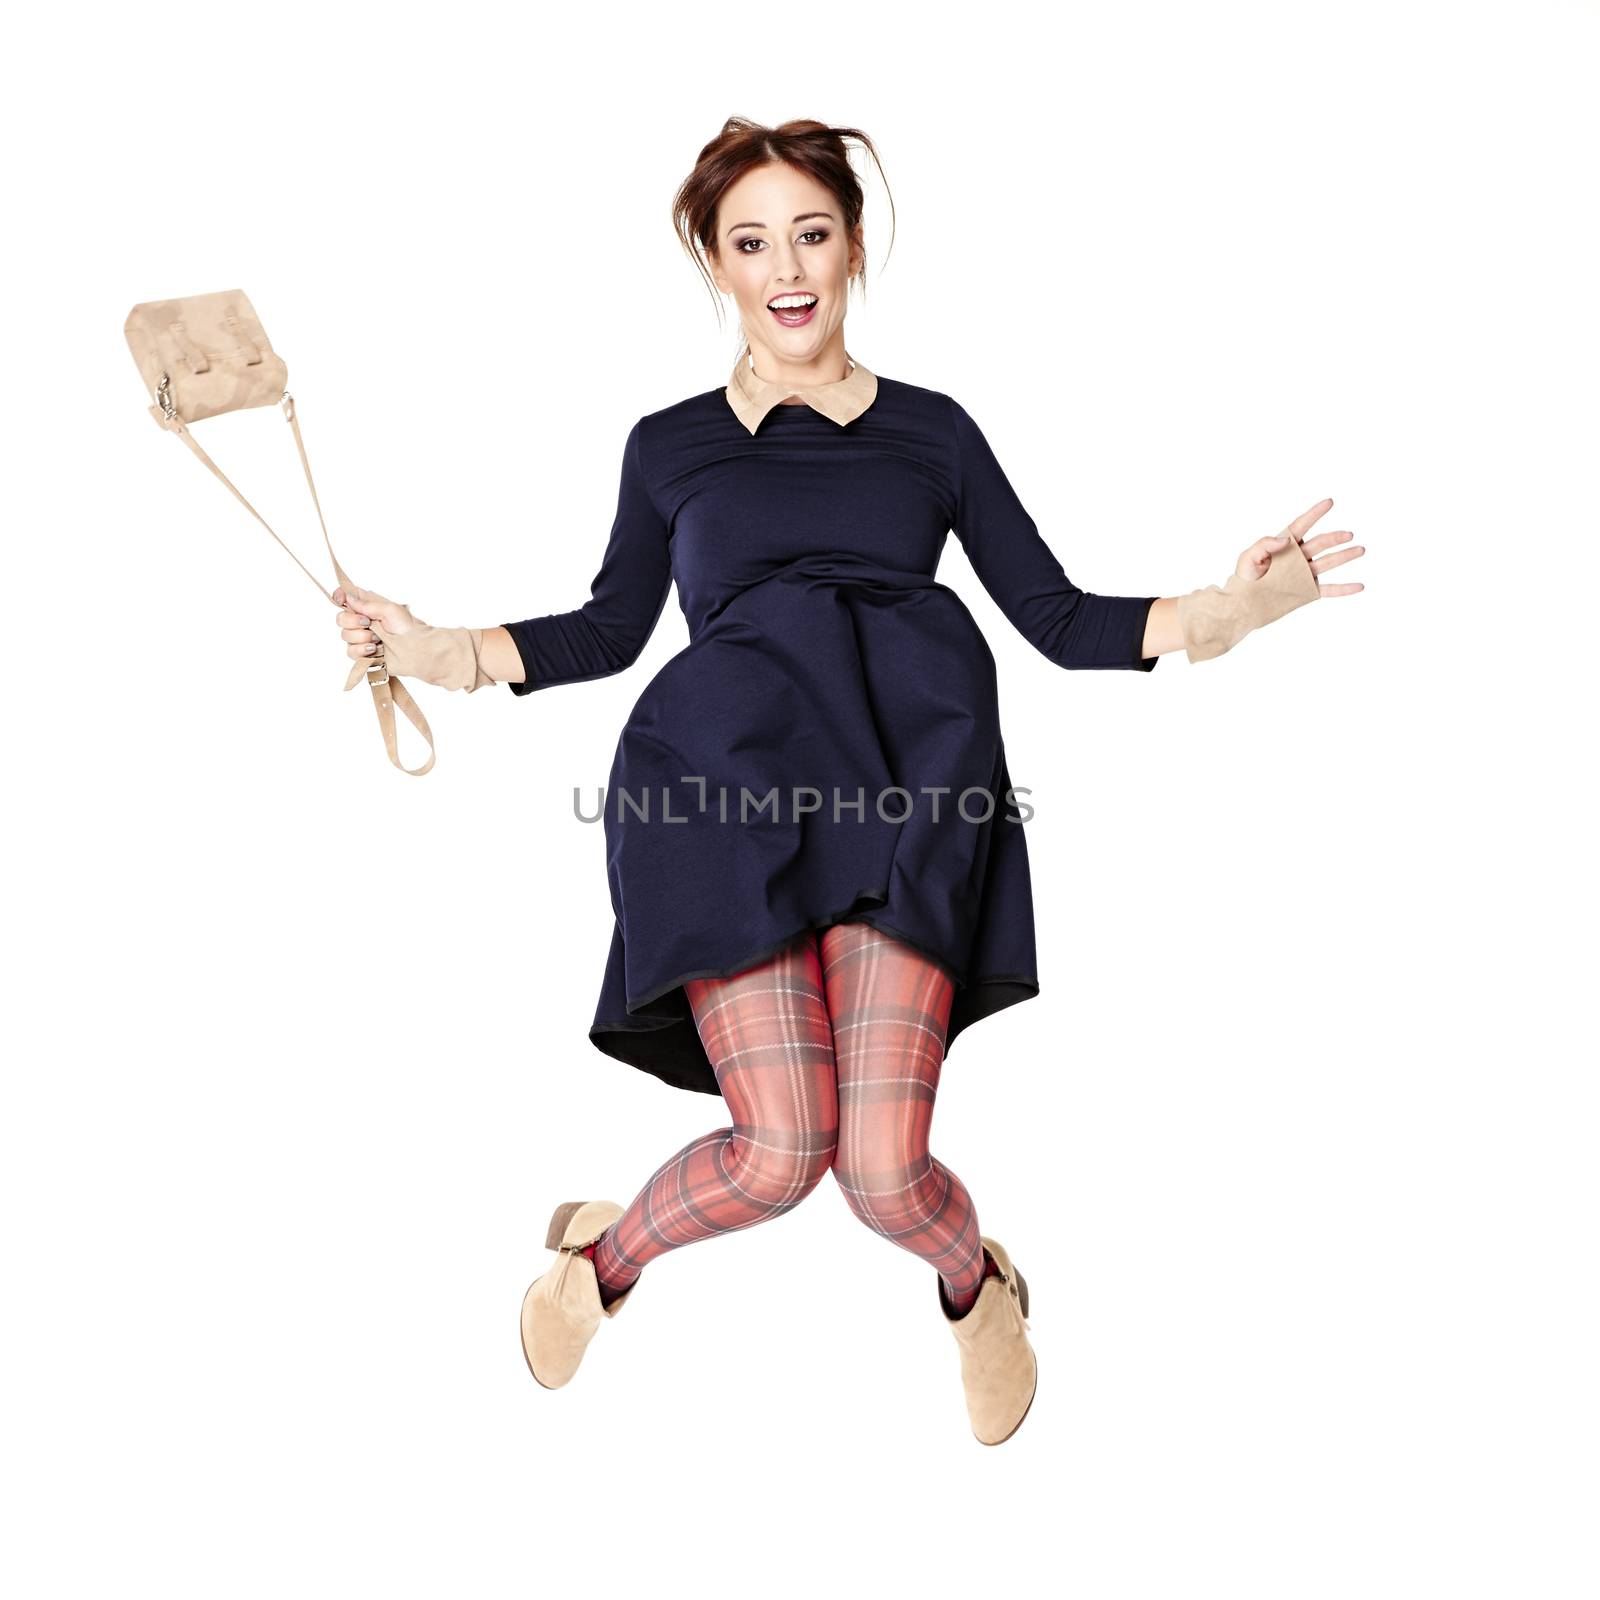 Young woman in dark blue dress and checkered tights is jumping over white background.